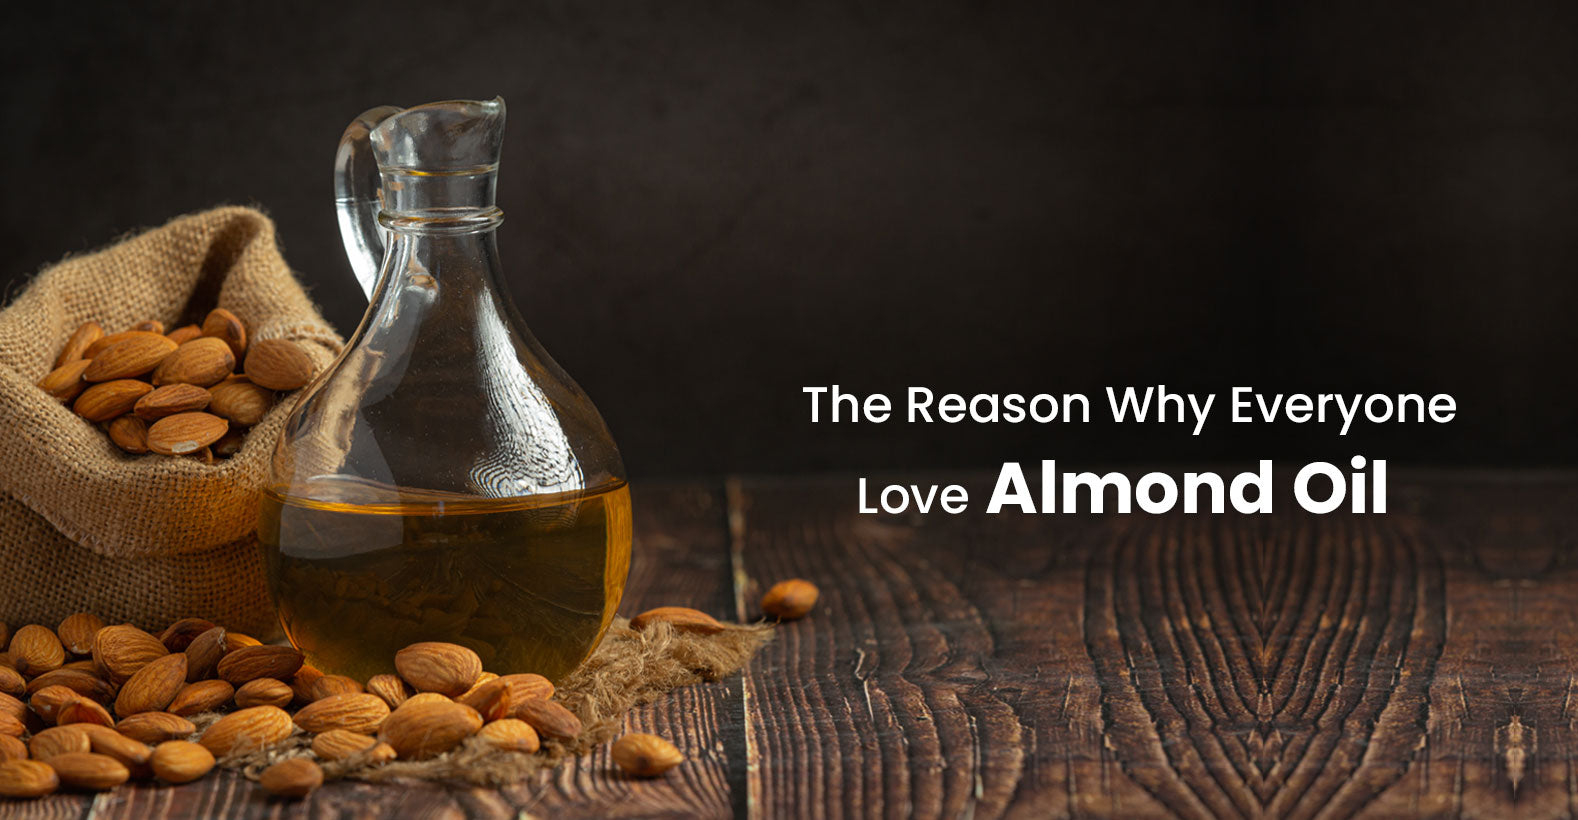 The Reason Why Everyone Love Almond Oil